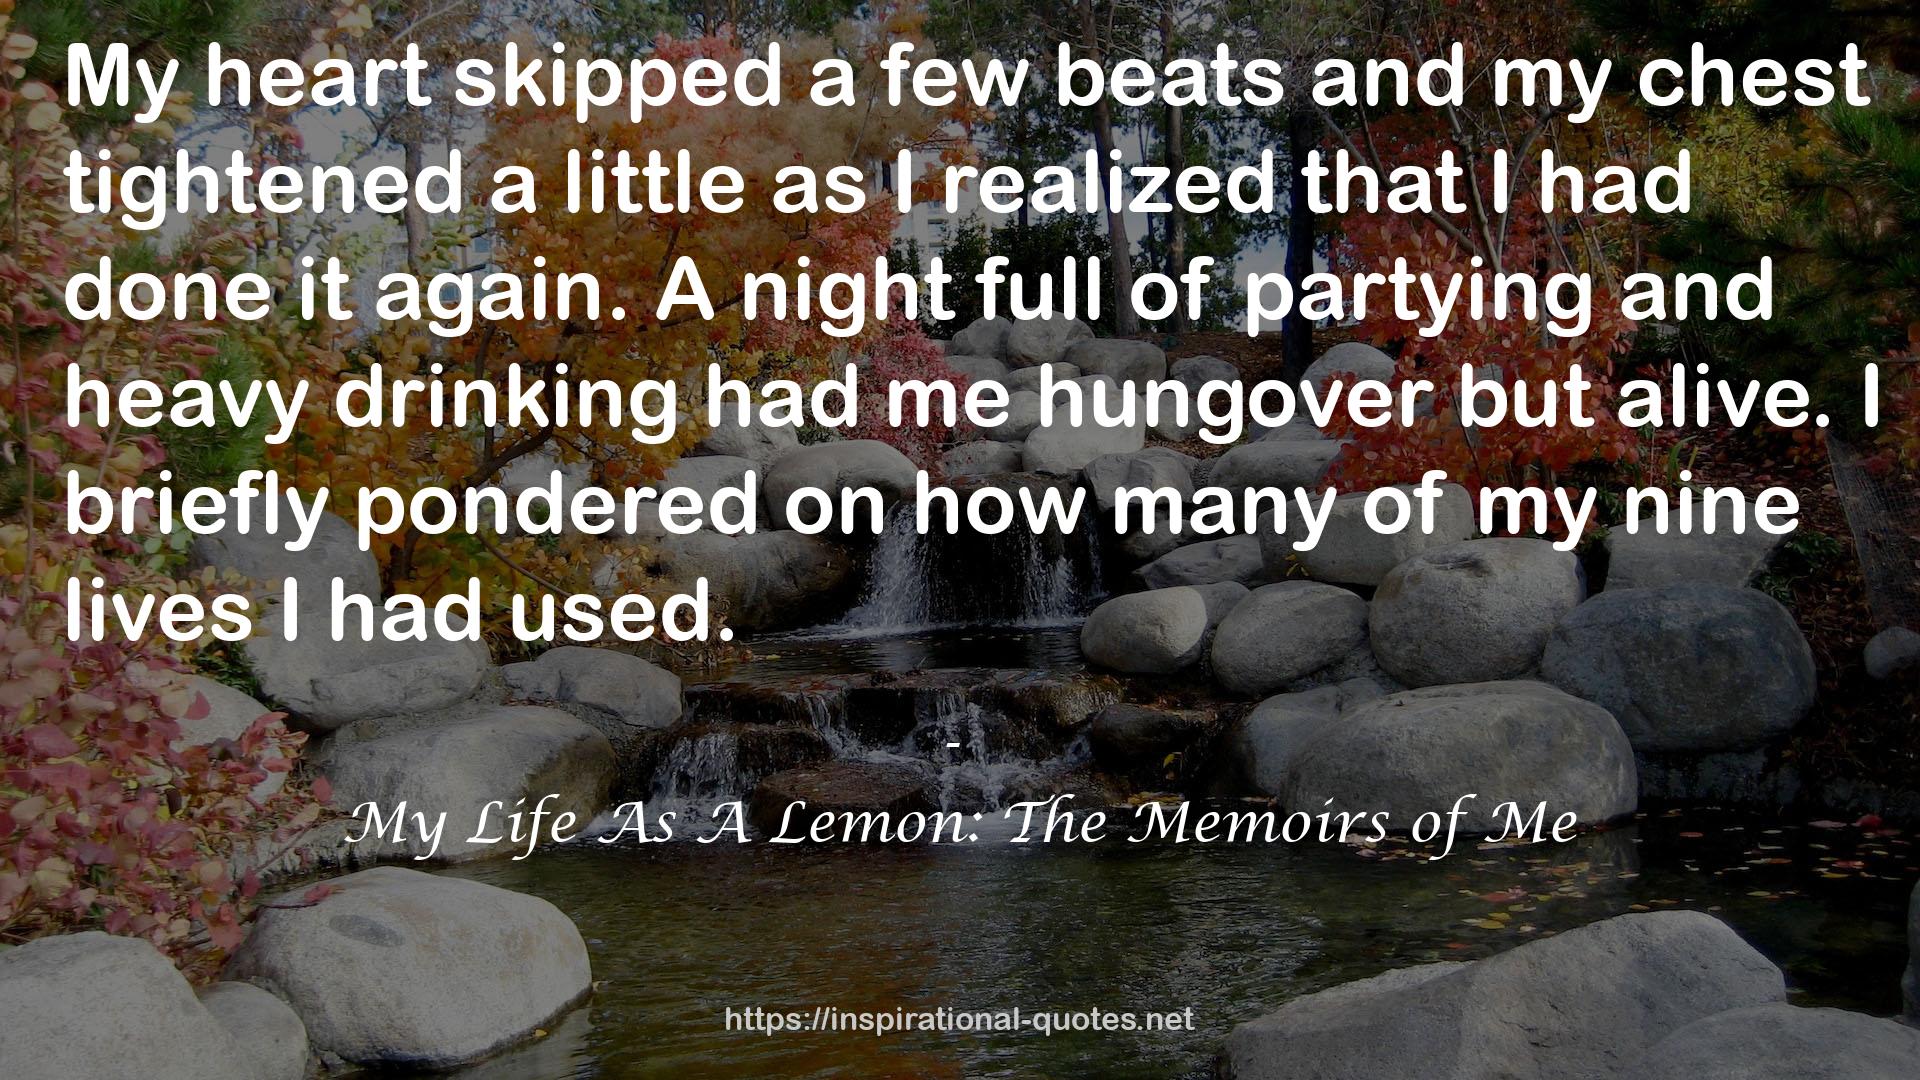 My Life As A Lemon: The Memoirs of Me QUOTES